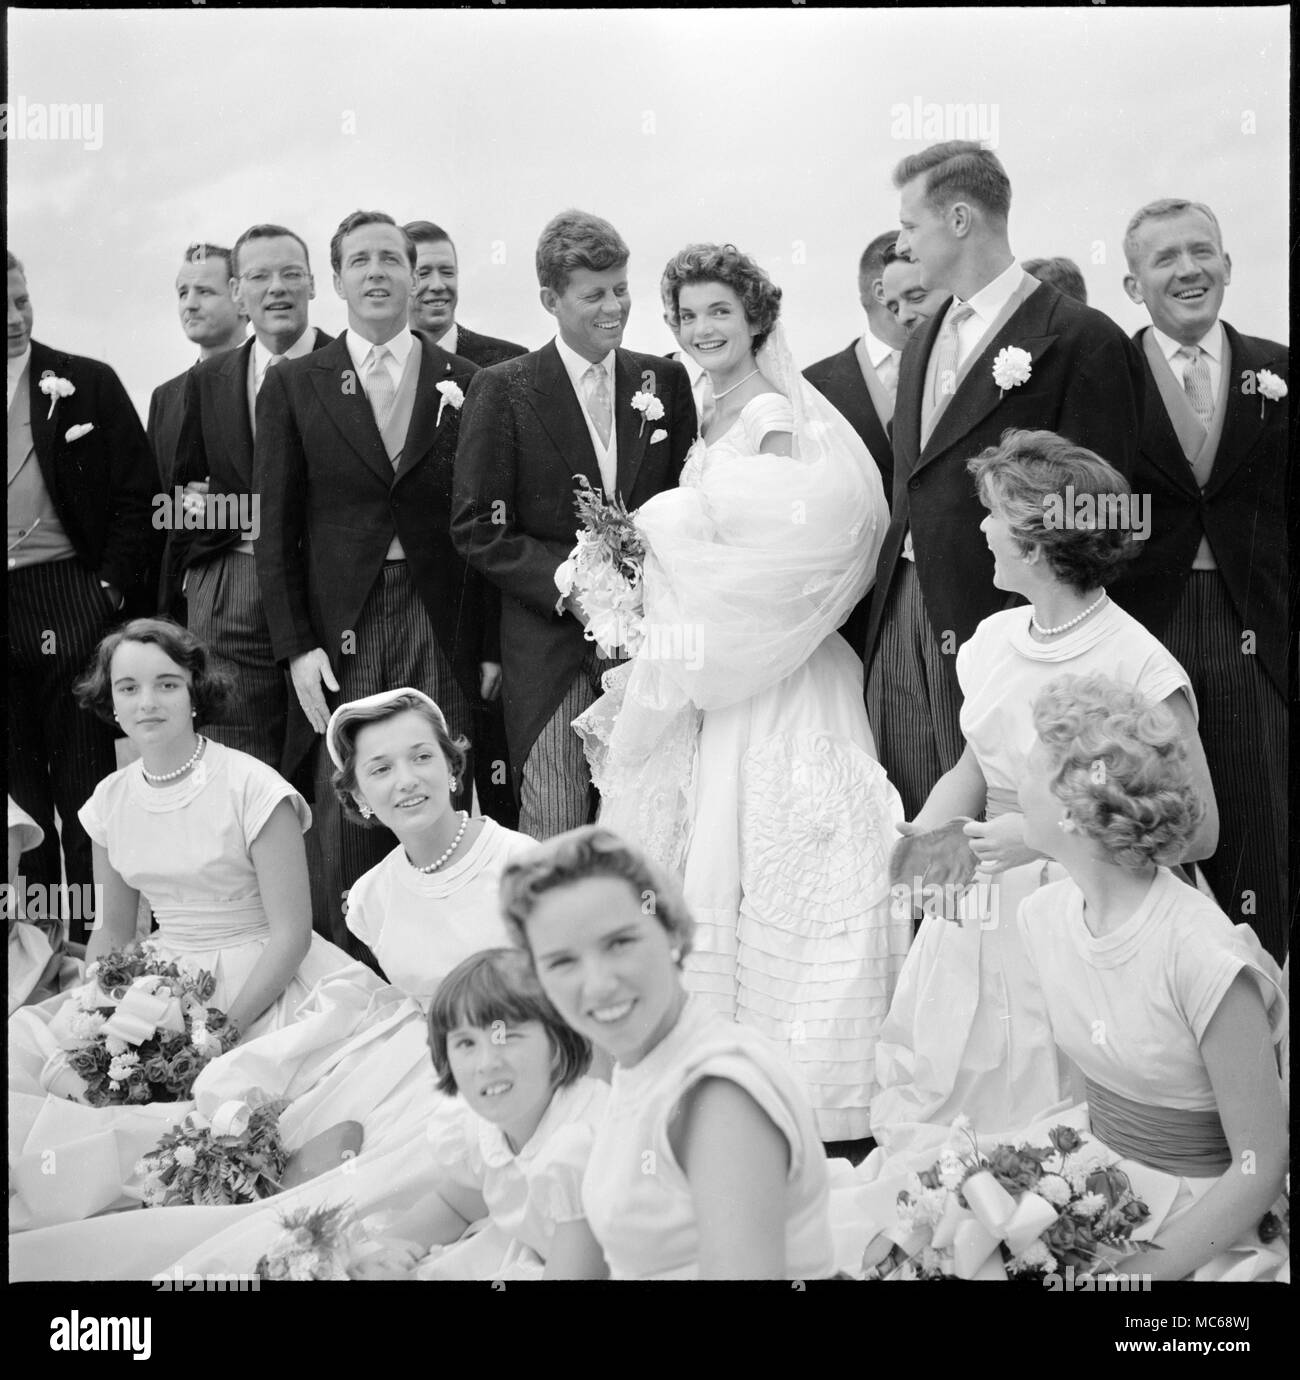 Jackie Bouvier Kennedy and John F. Kennedy, in wedding attire, with members of their wedding party - September 12, 1953 Stock Photo